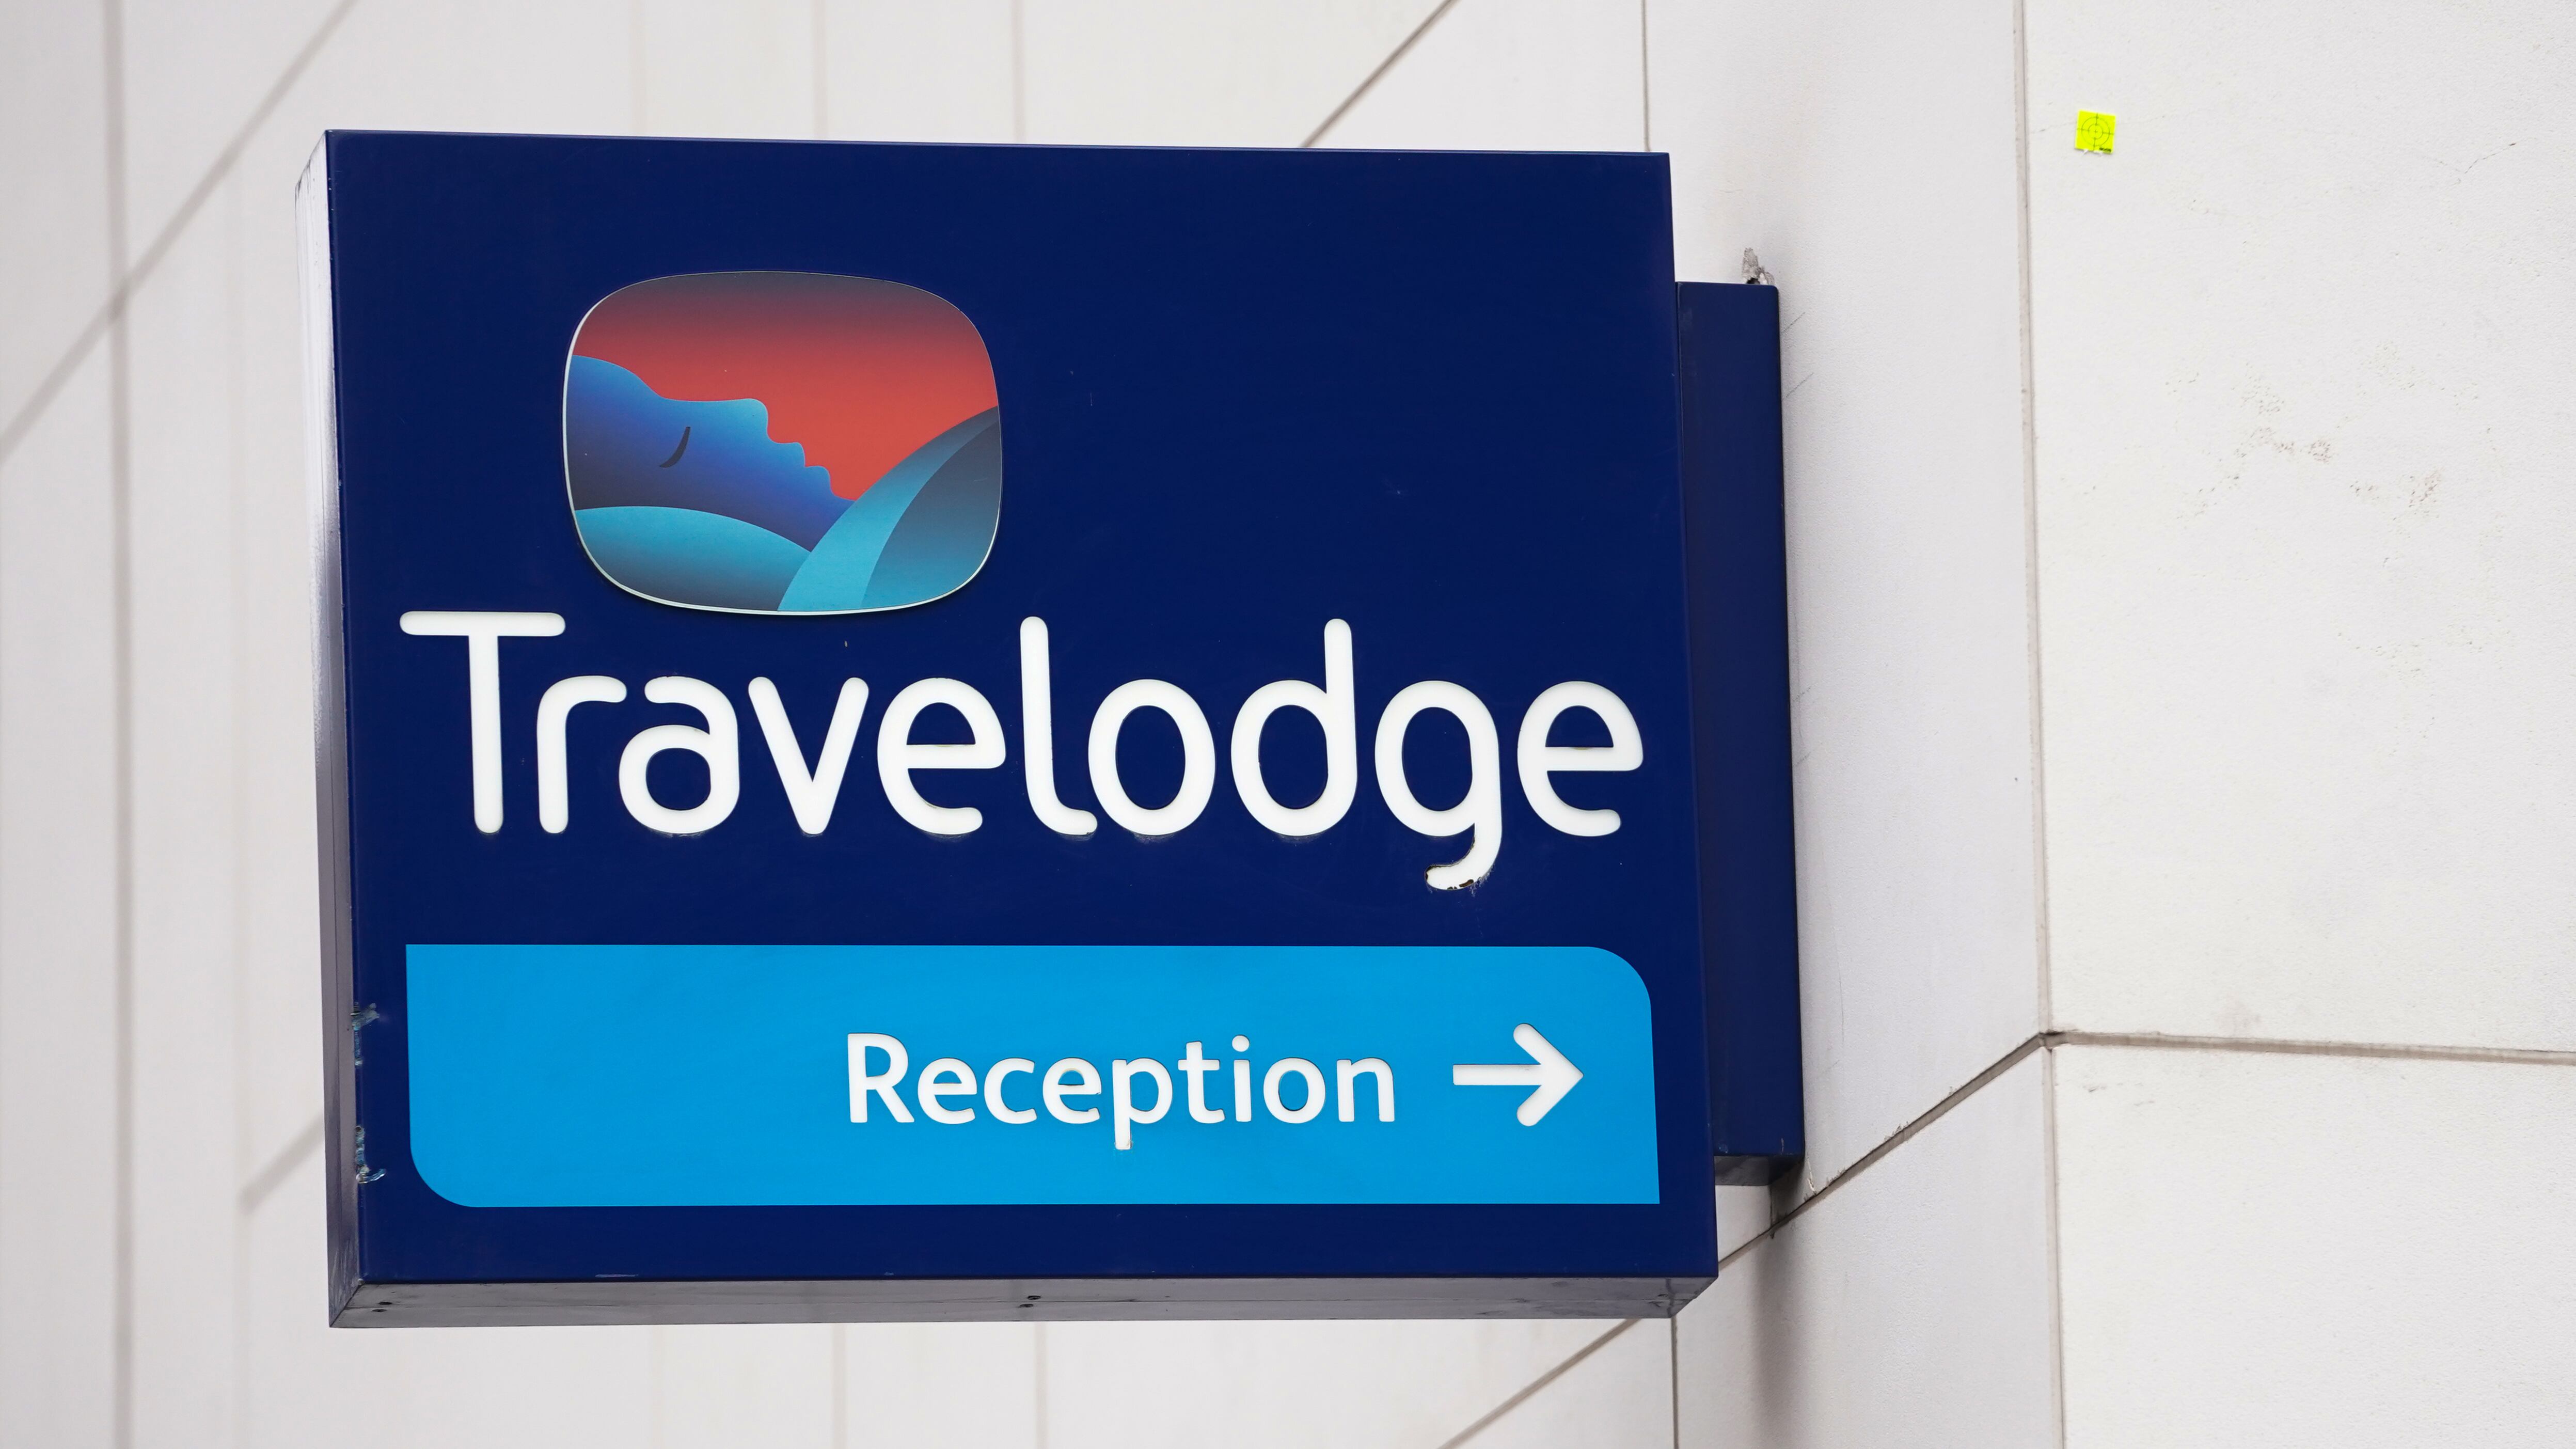 Hotel giant Travelodge has launched a recruitment drive to fill more than 300 jobs across its business